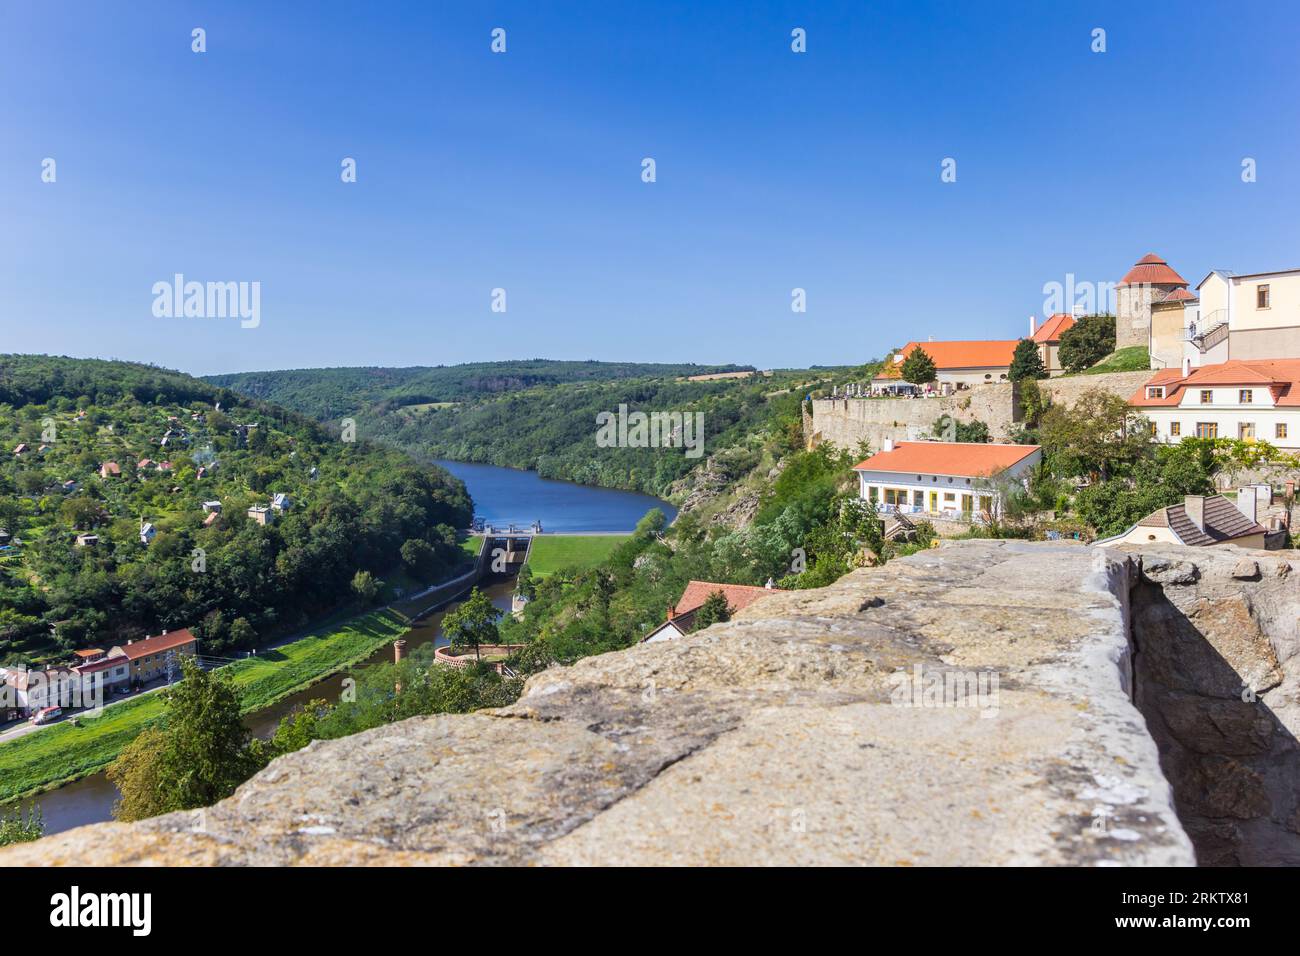 City wall and the river Thaya in Znojmo, Czech Republic Stock Photo